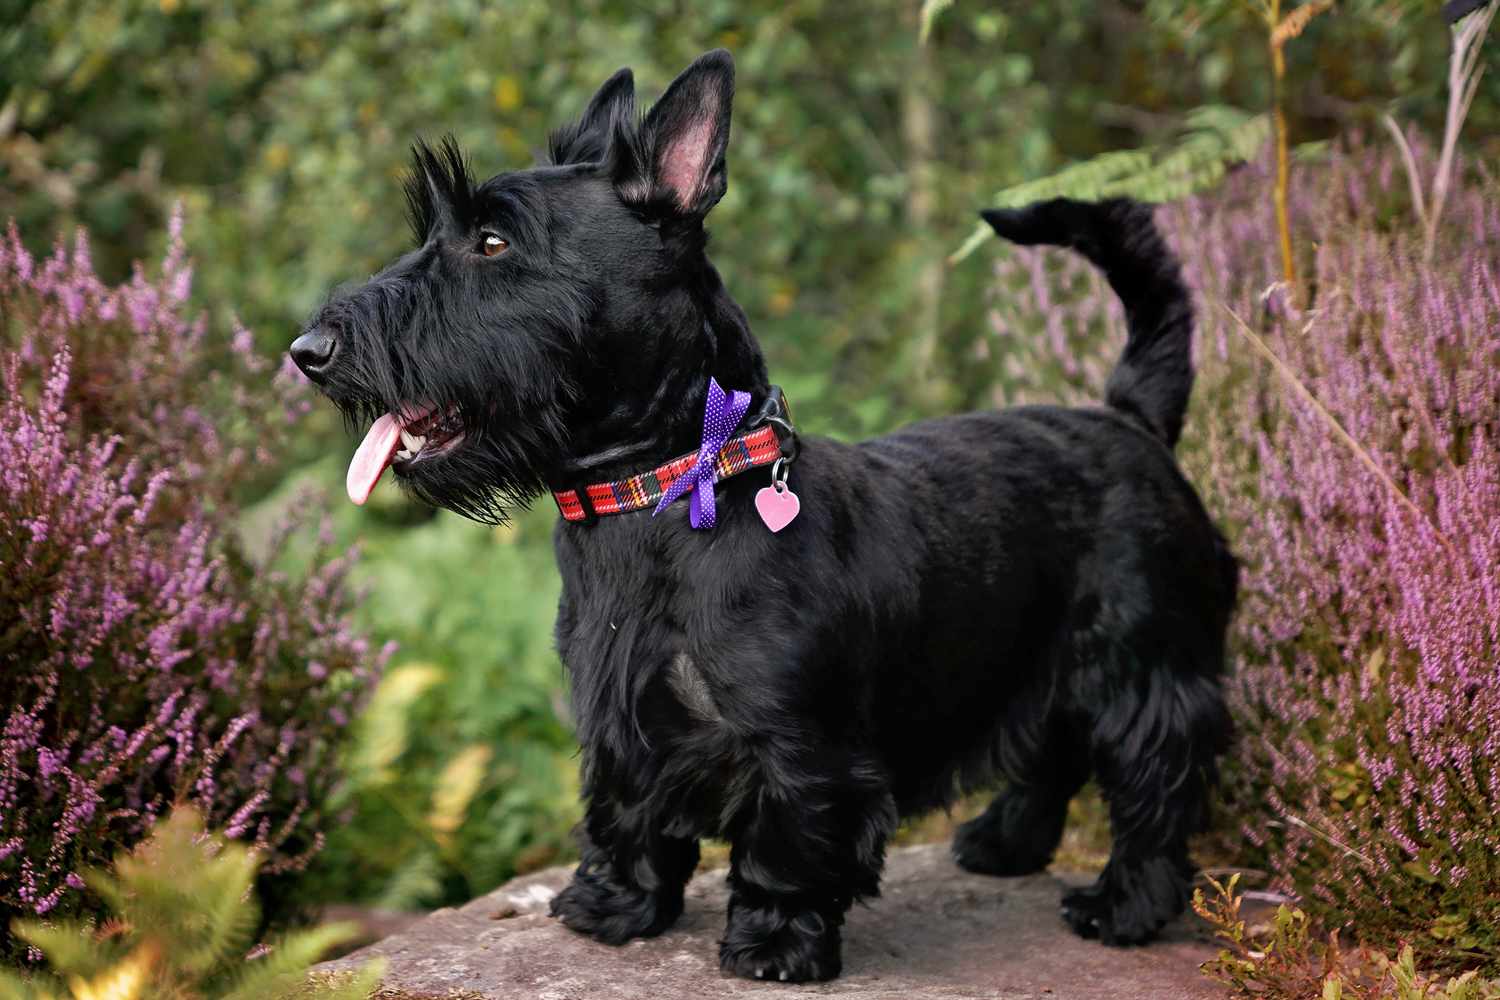 7 in 10 People Can’t Identity More Than 15 of These Dog Breeds 🐕 — Let’s See If You Can Do It Scottish Terrier or Scottie